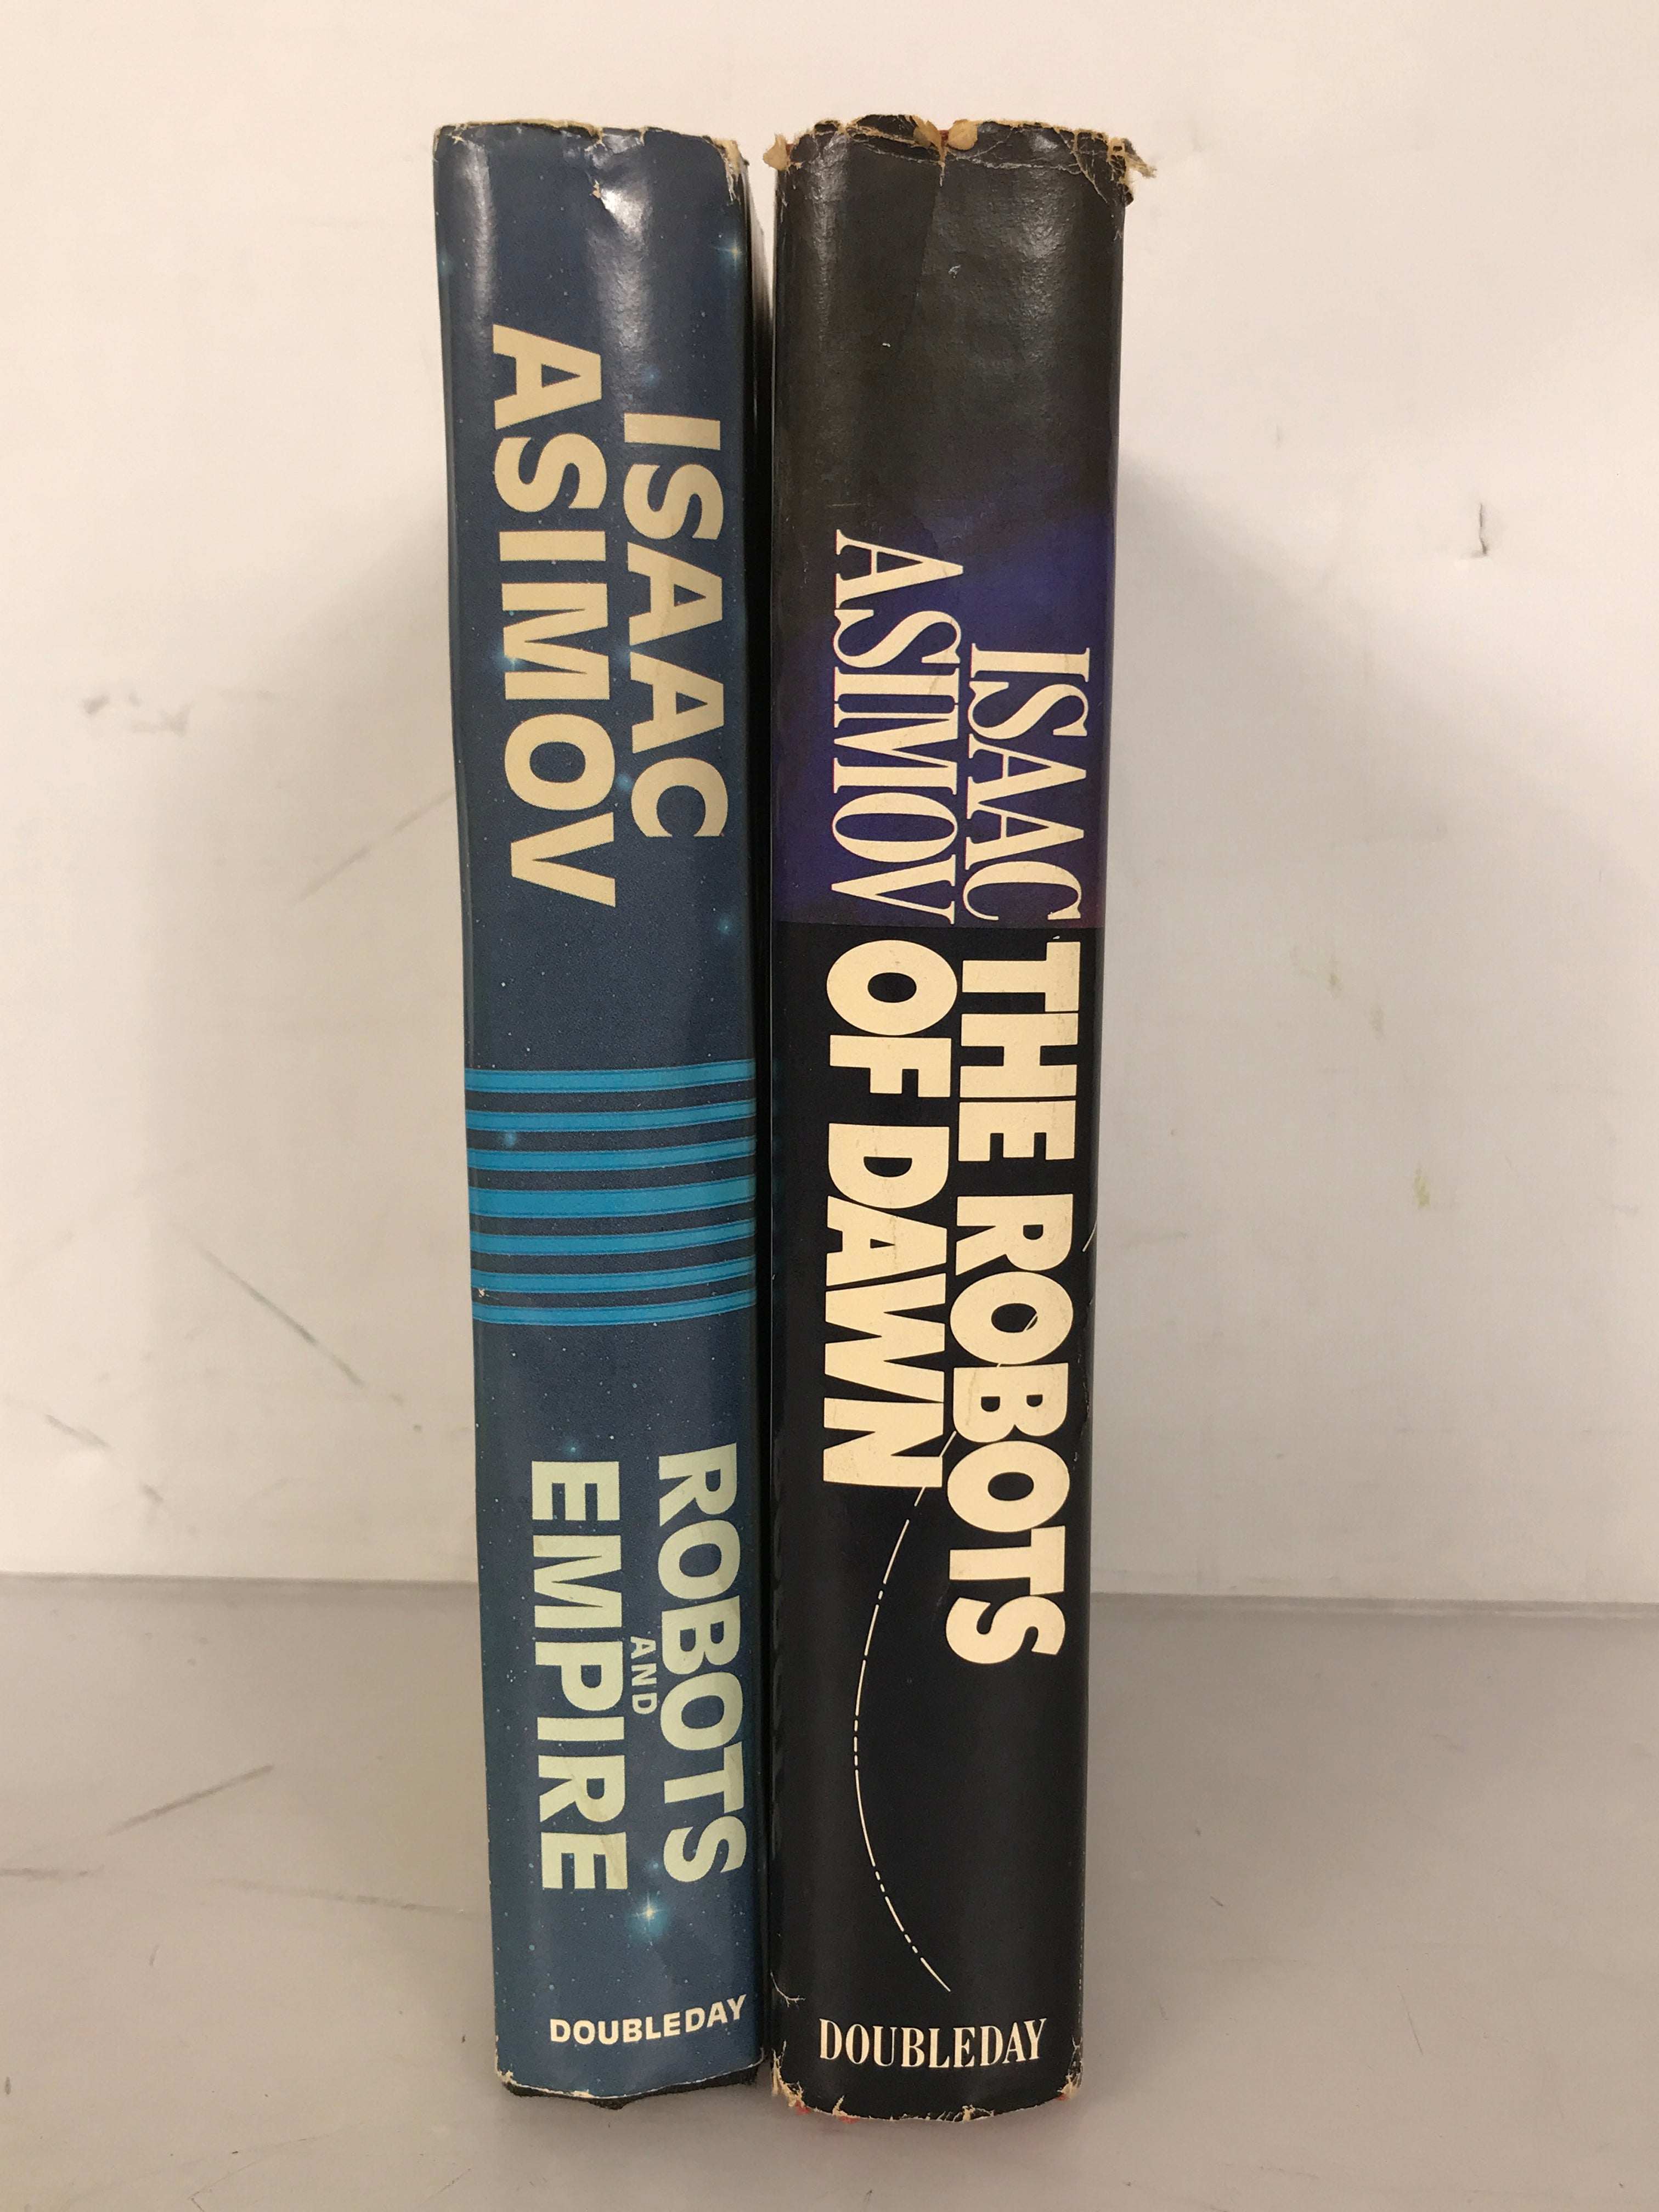 Lot of 2 Isaac Asimov First Editions: The Robots of Dawn (1983) and Robots and Empire (1985) HC DJ